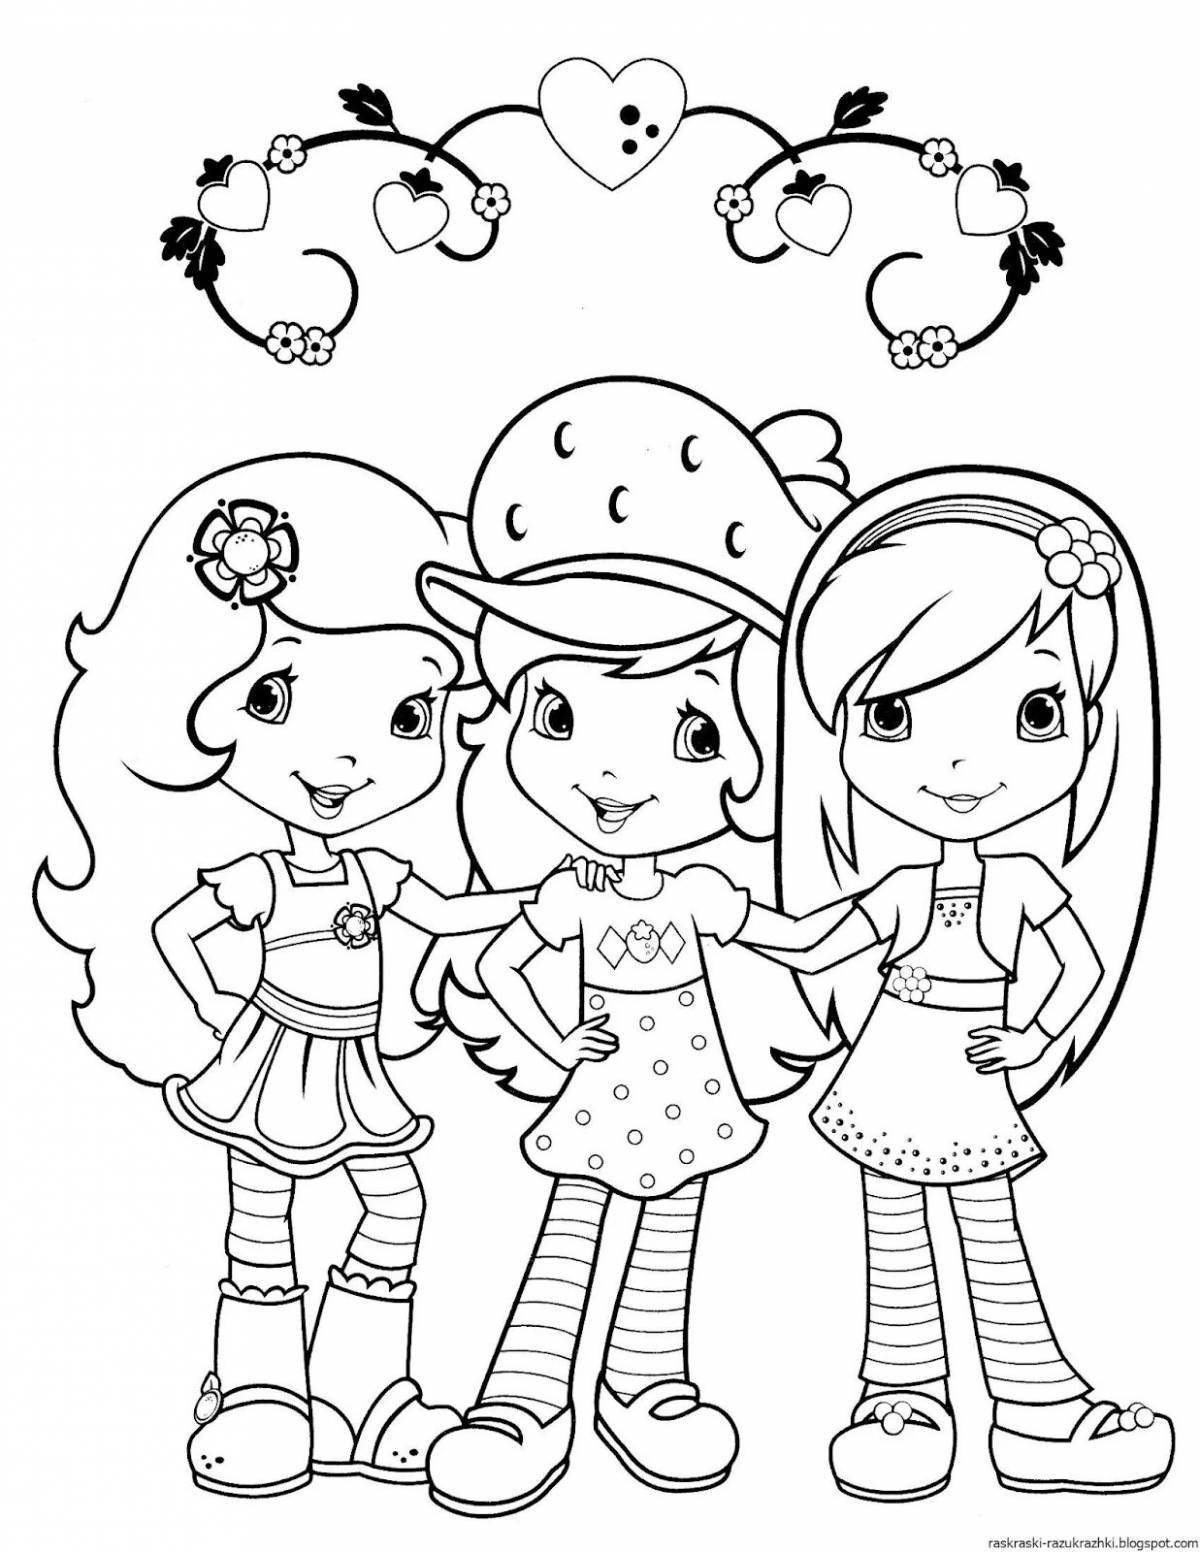 Color Exploration coloring book for interactive girls